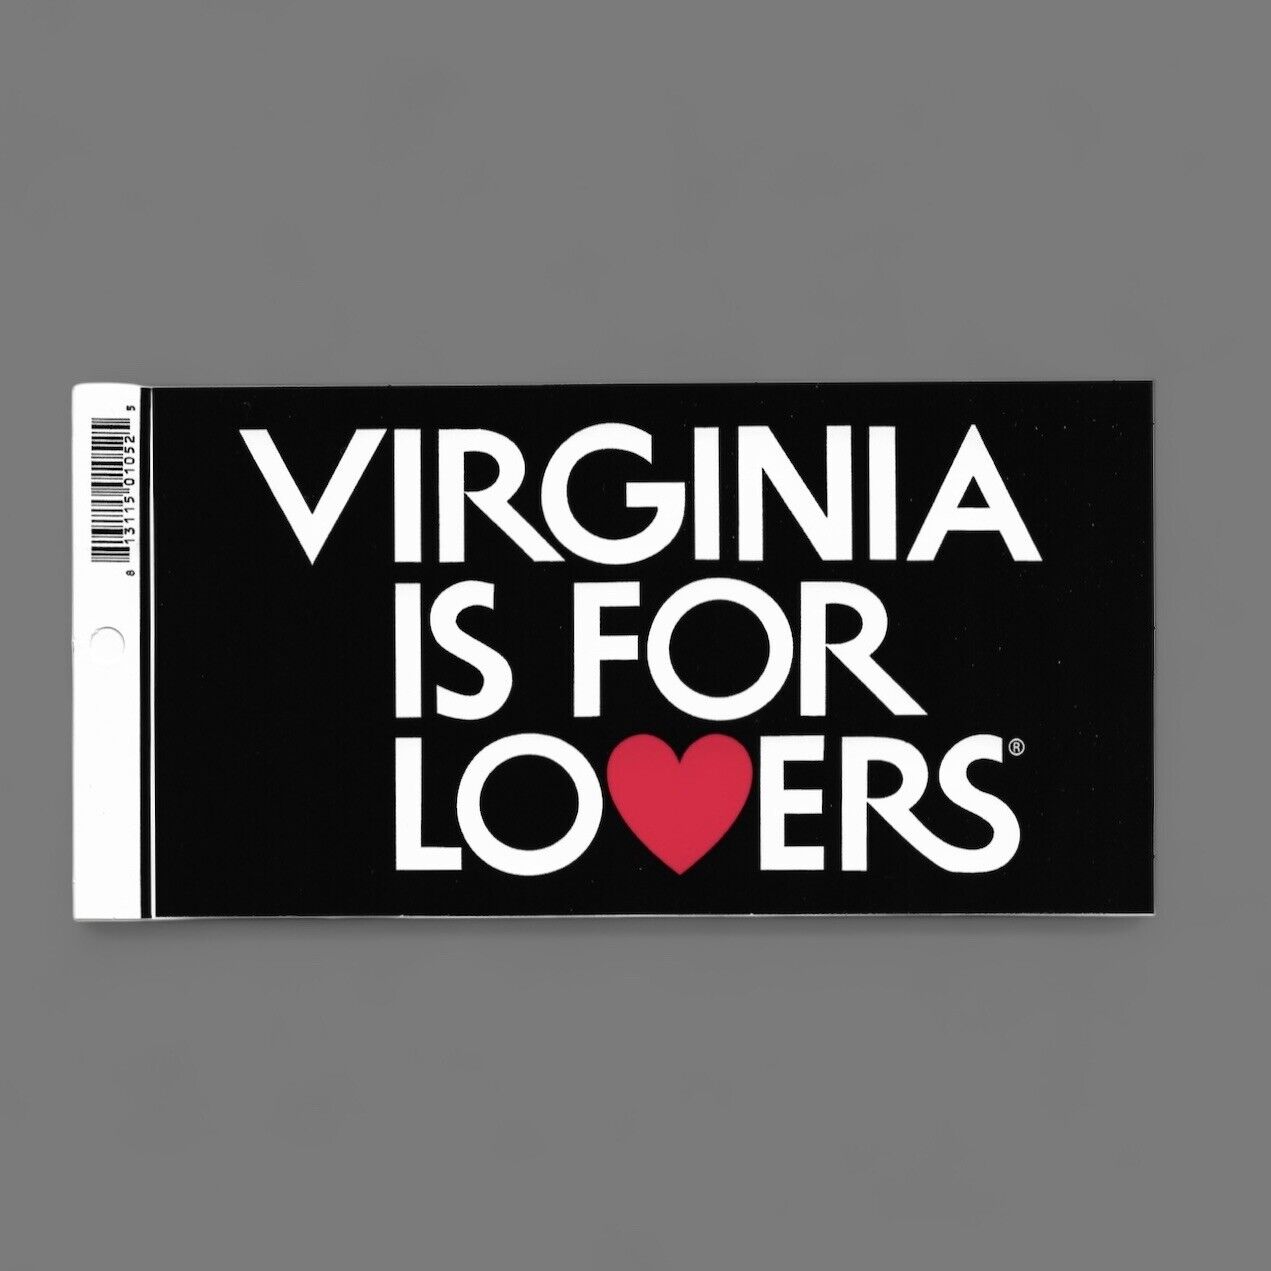 VIRGINIA IS FOR LOVERS Decal Bumper Sticker